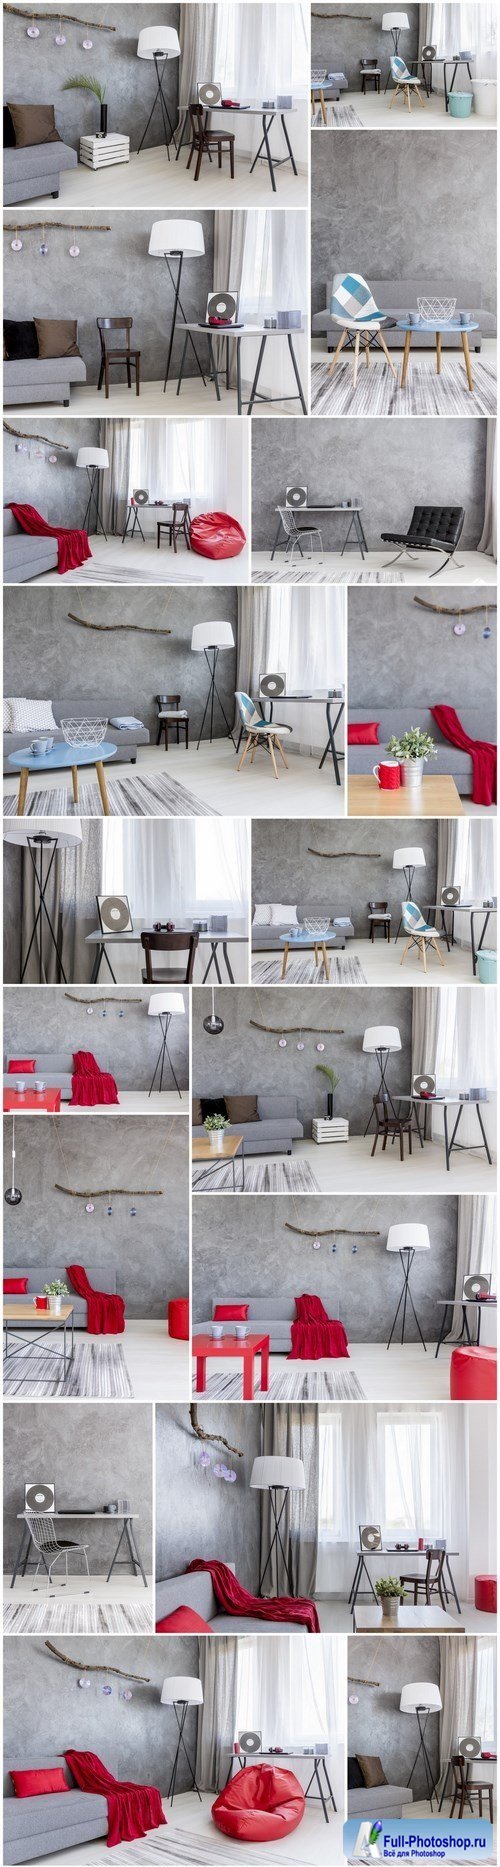 Ascetic home interior in grey - Grey flat interior with stylish furniture, 20xUHQ JPEG